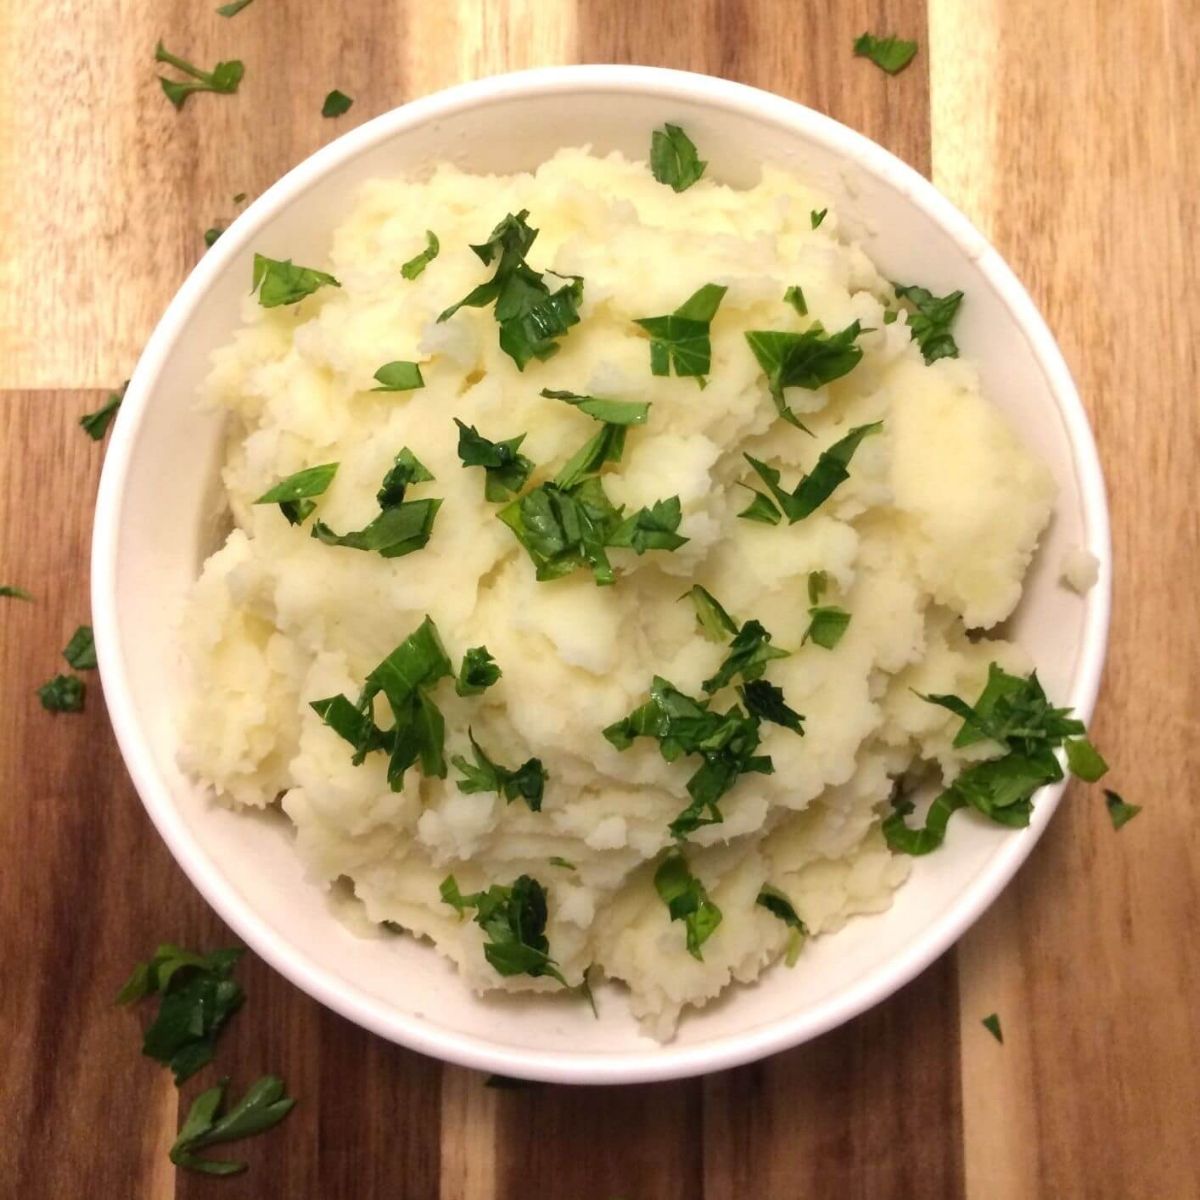 mashed potatoes garnished with fresh parsley in a white round bowl on a wooden cutting board